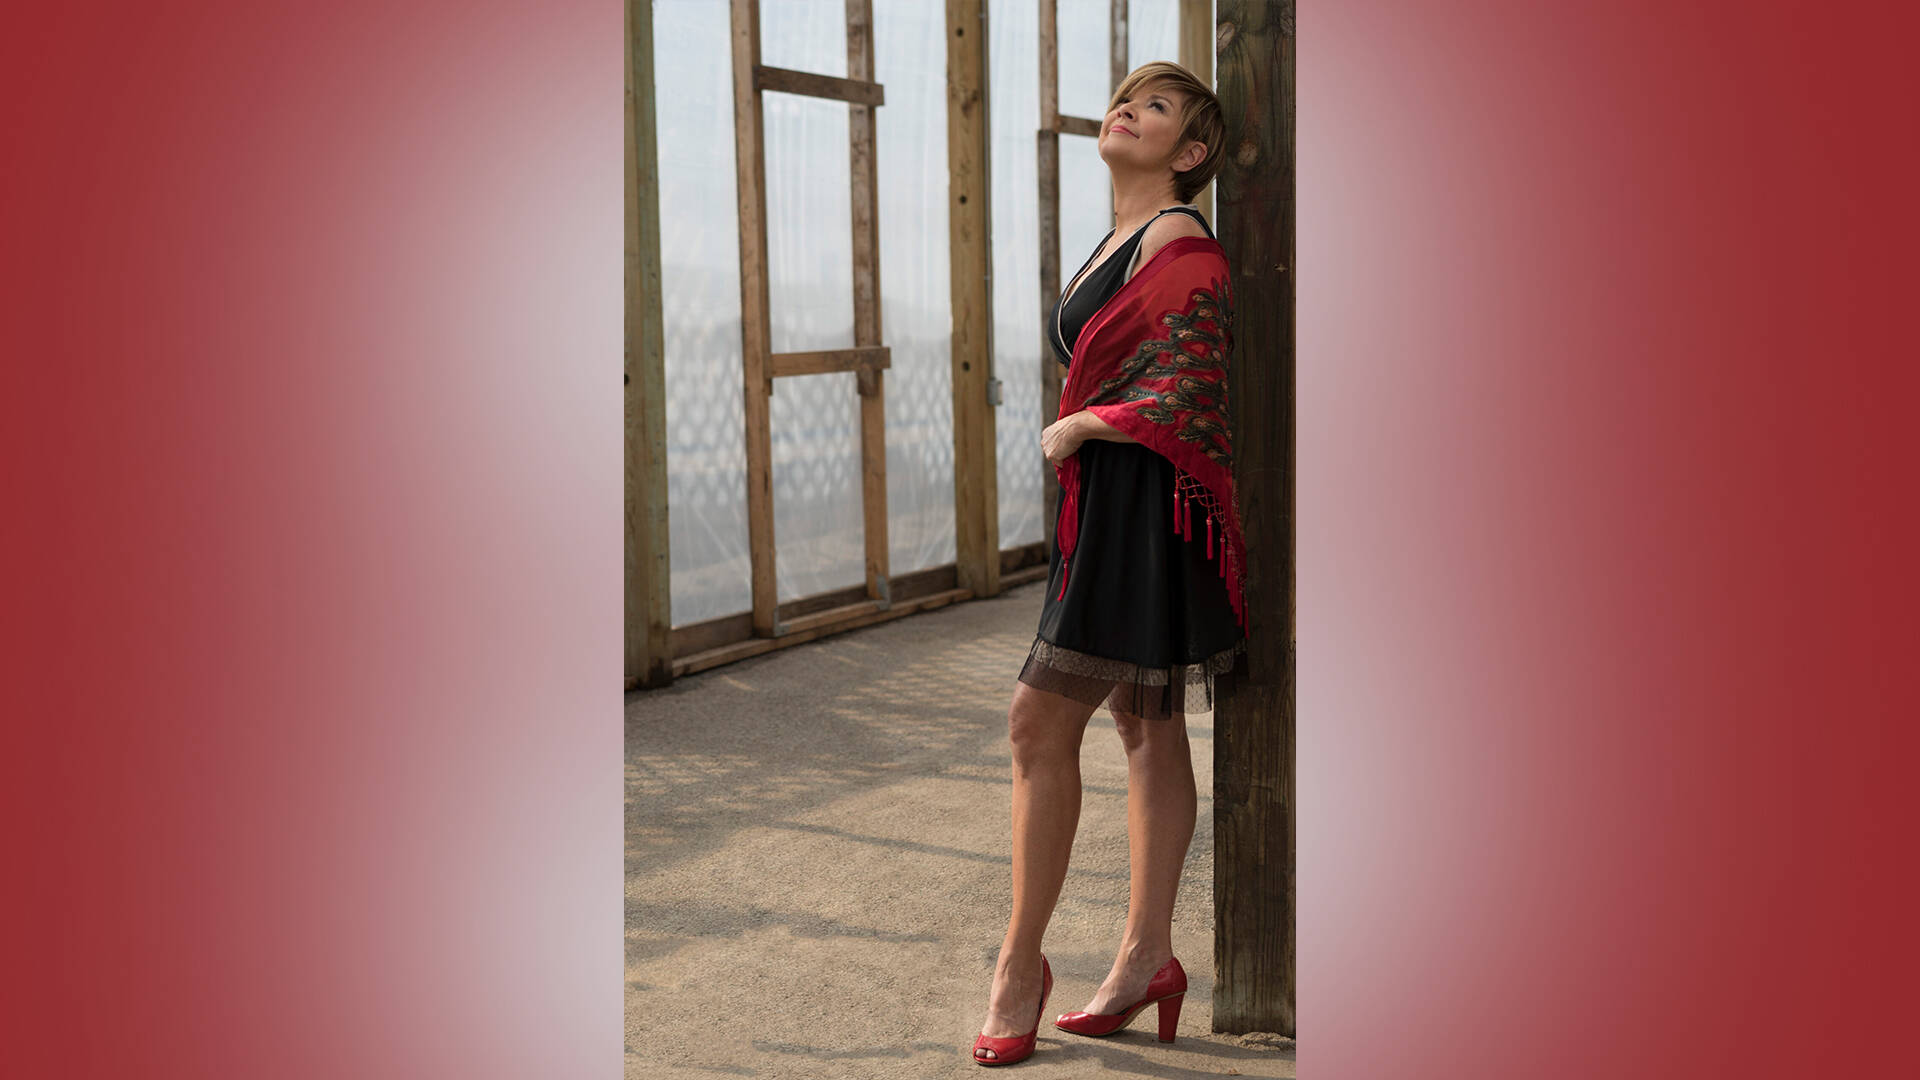 Contributed photo
Karrin Allyson performs at Orcas Center on Saturday, September 30 at 7 p.m.